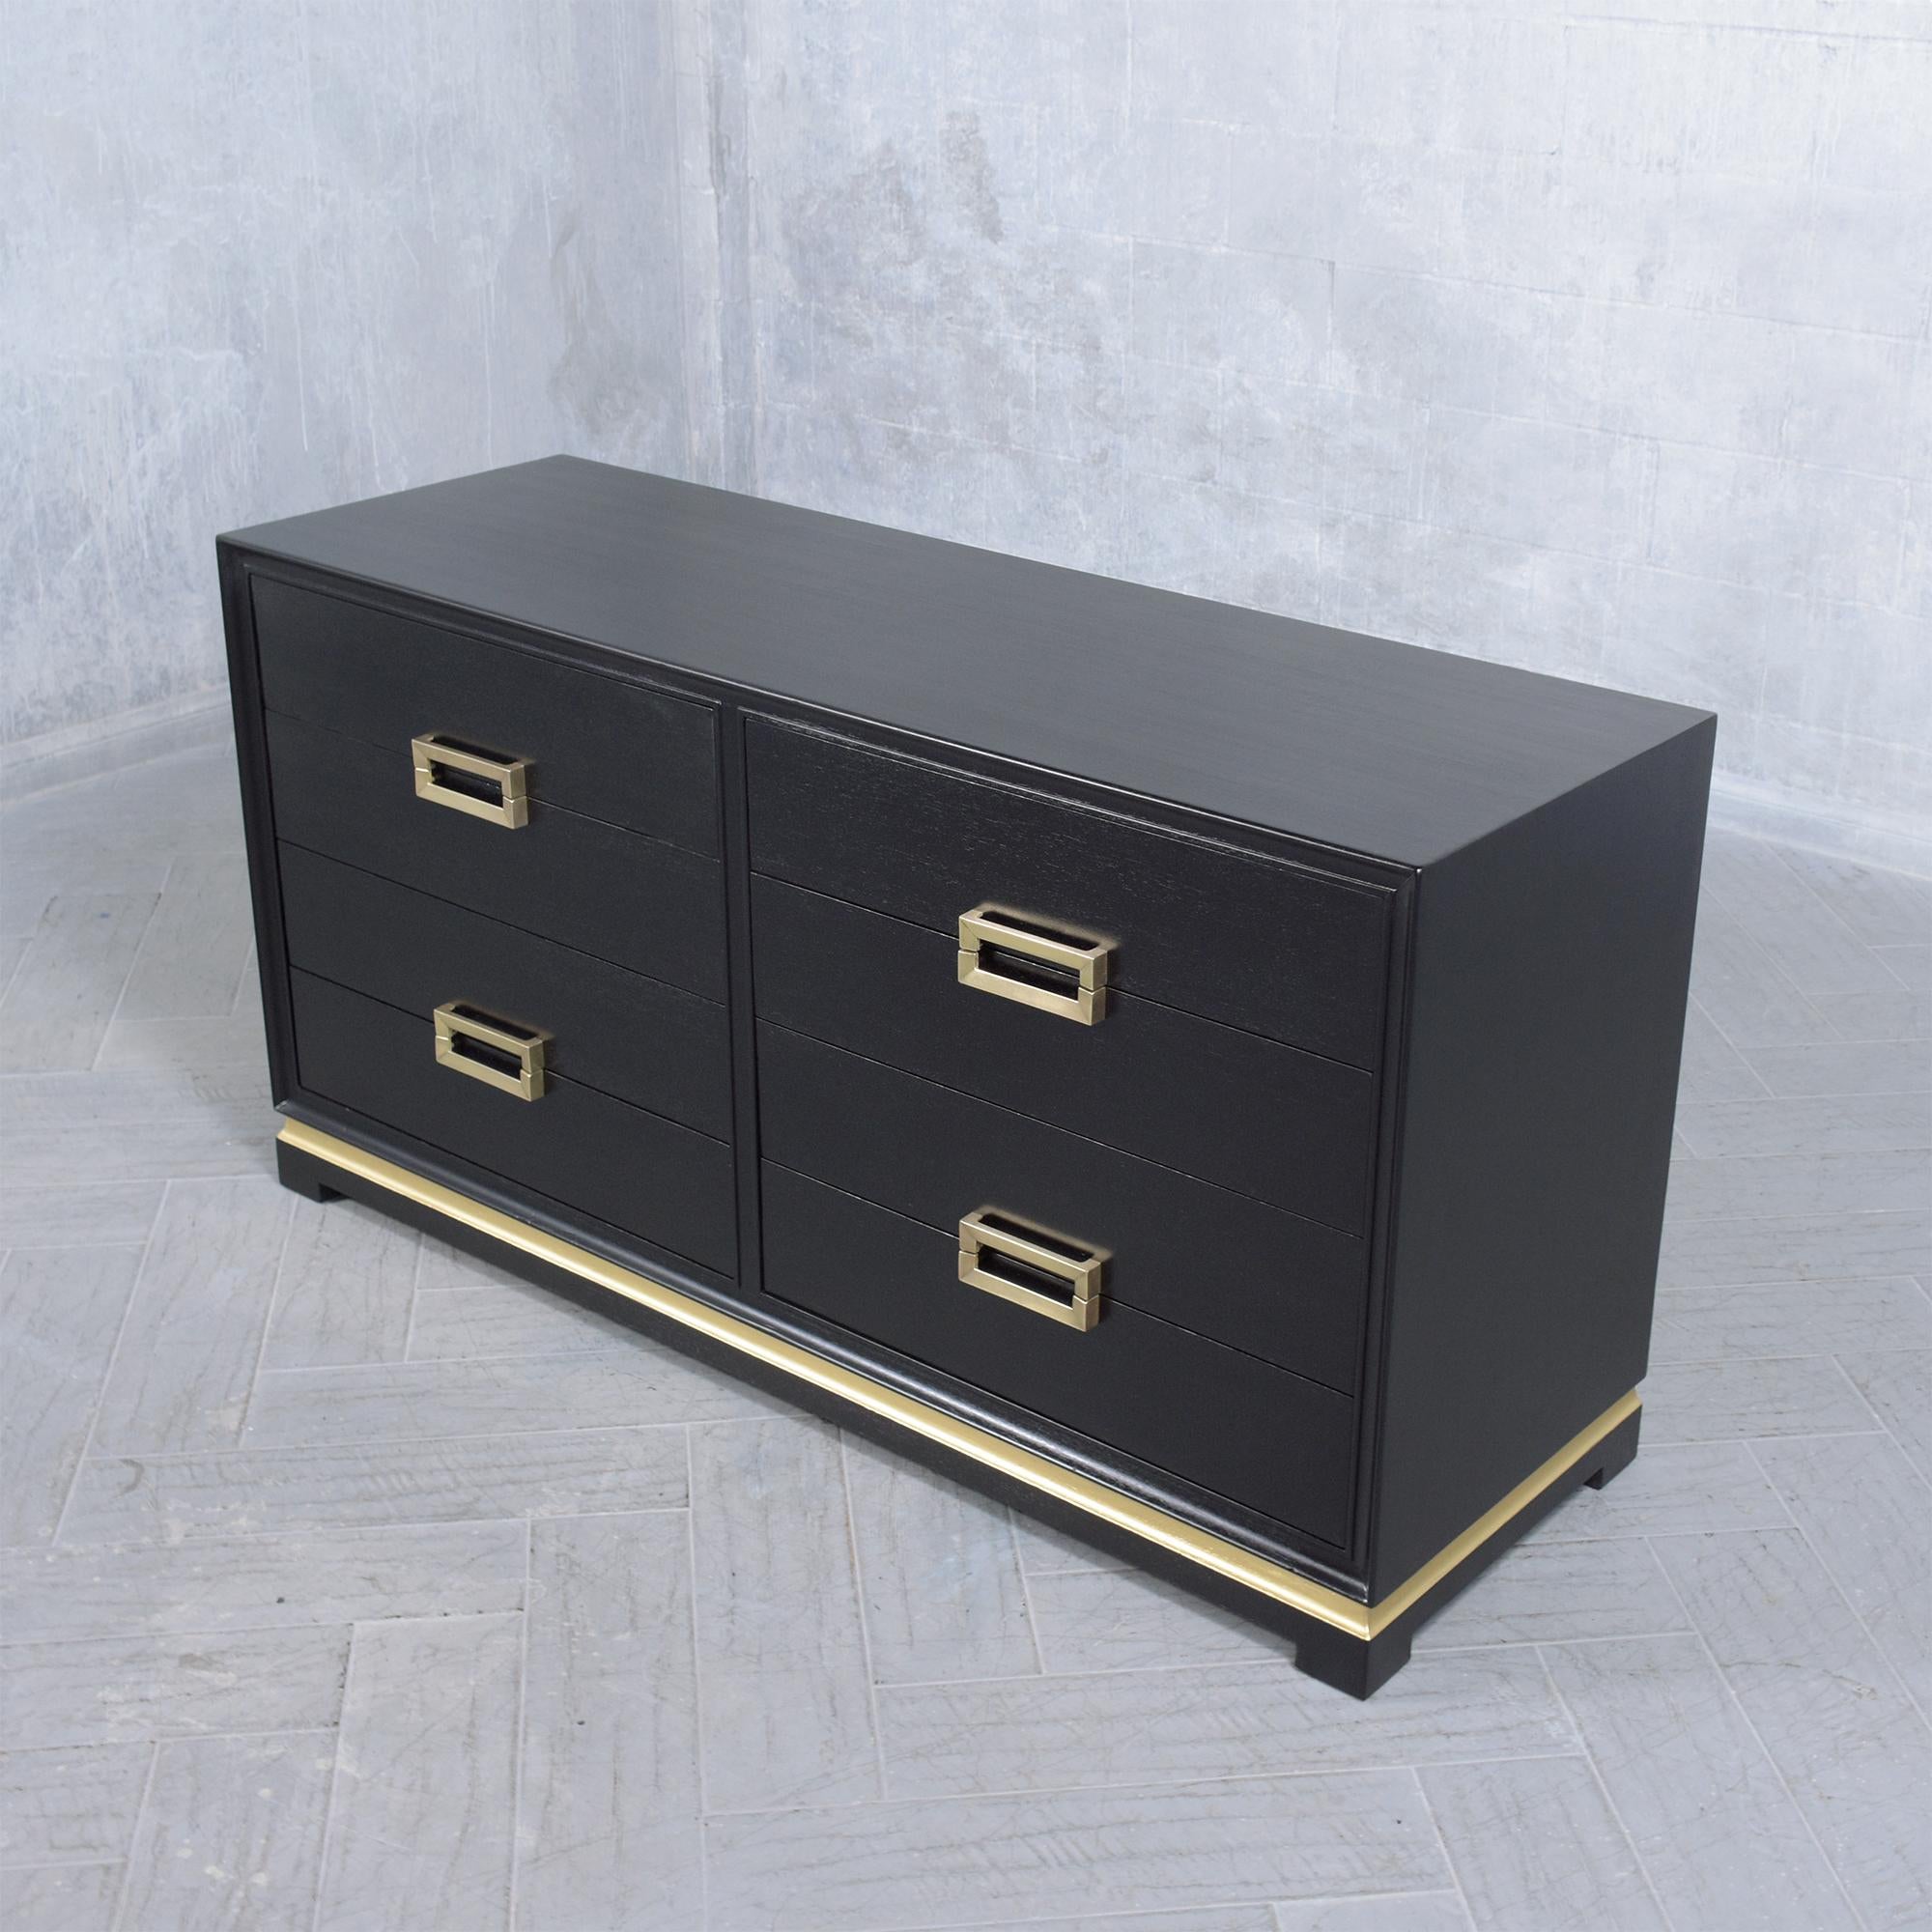 Lacquered Vintage 1960s Ebonized Mahogany Dresser with Brass Handles For Sale